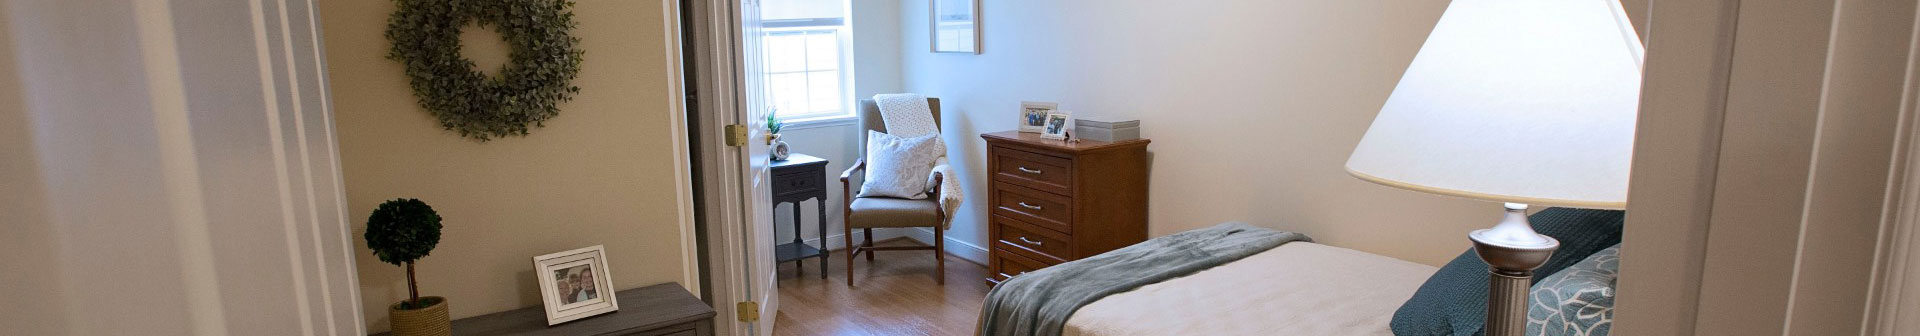 cropped photo of a memory care suite at Artis Senior Living